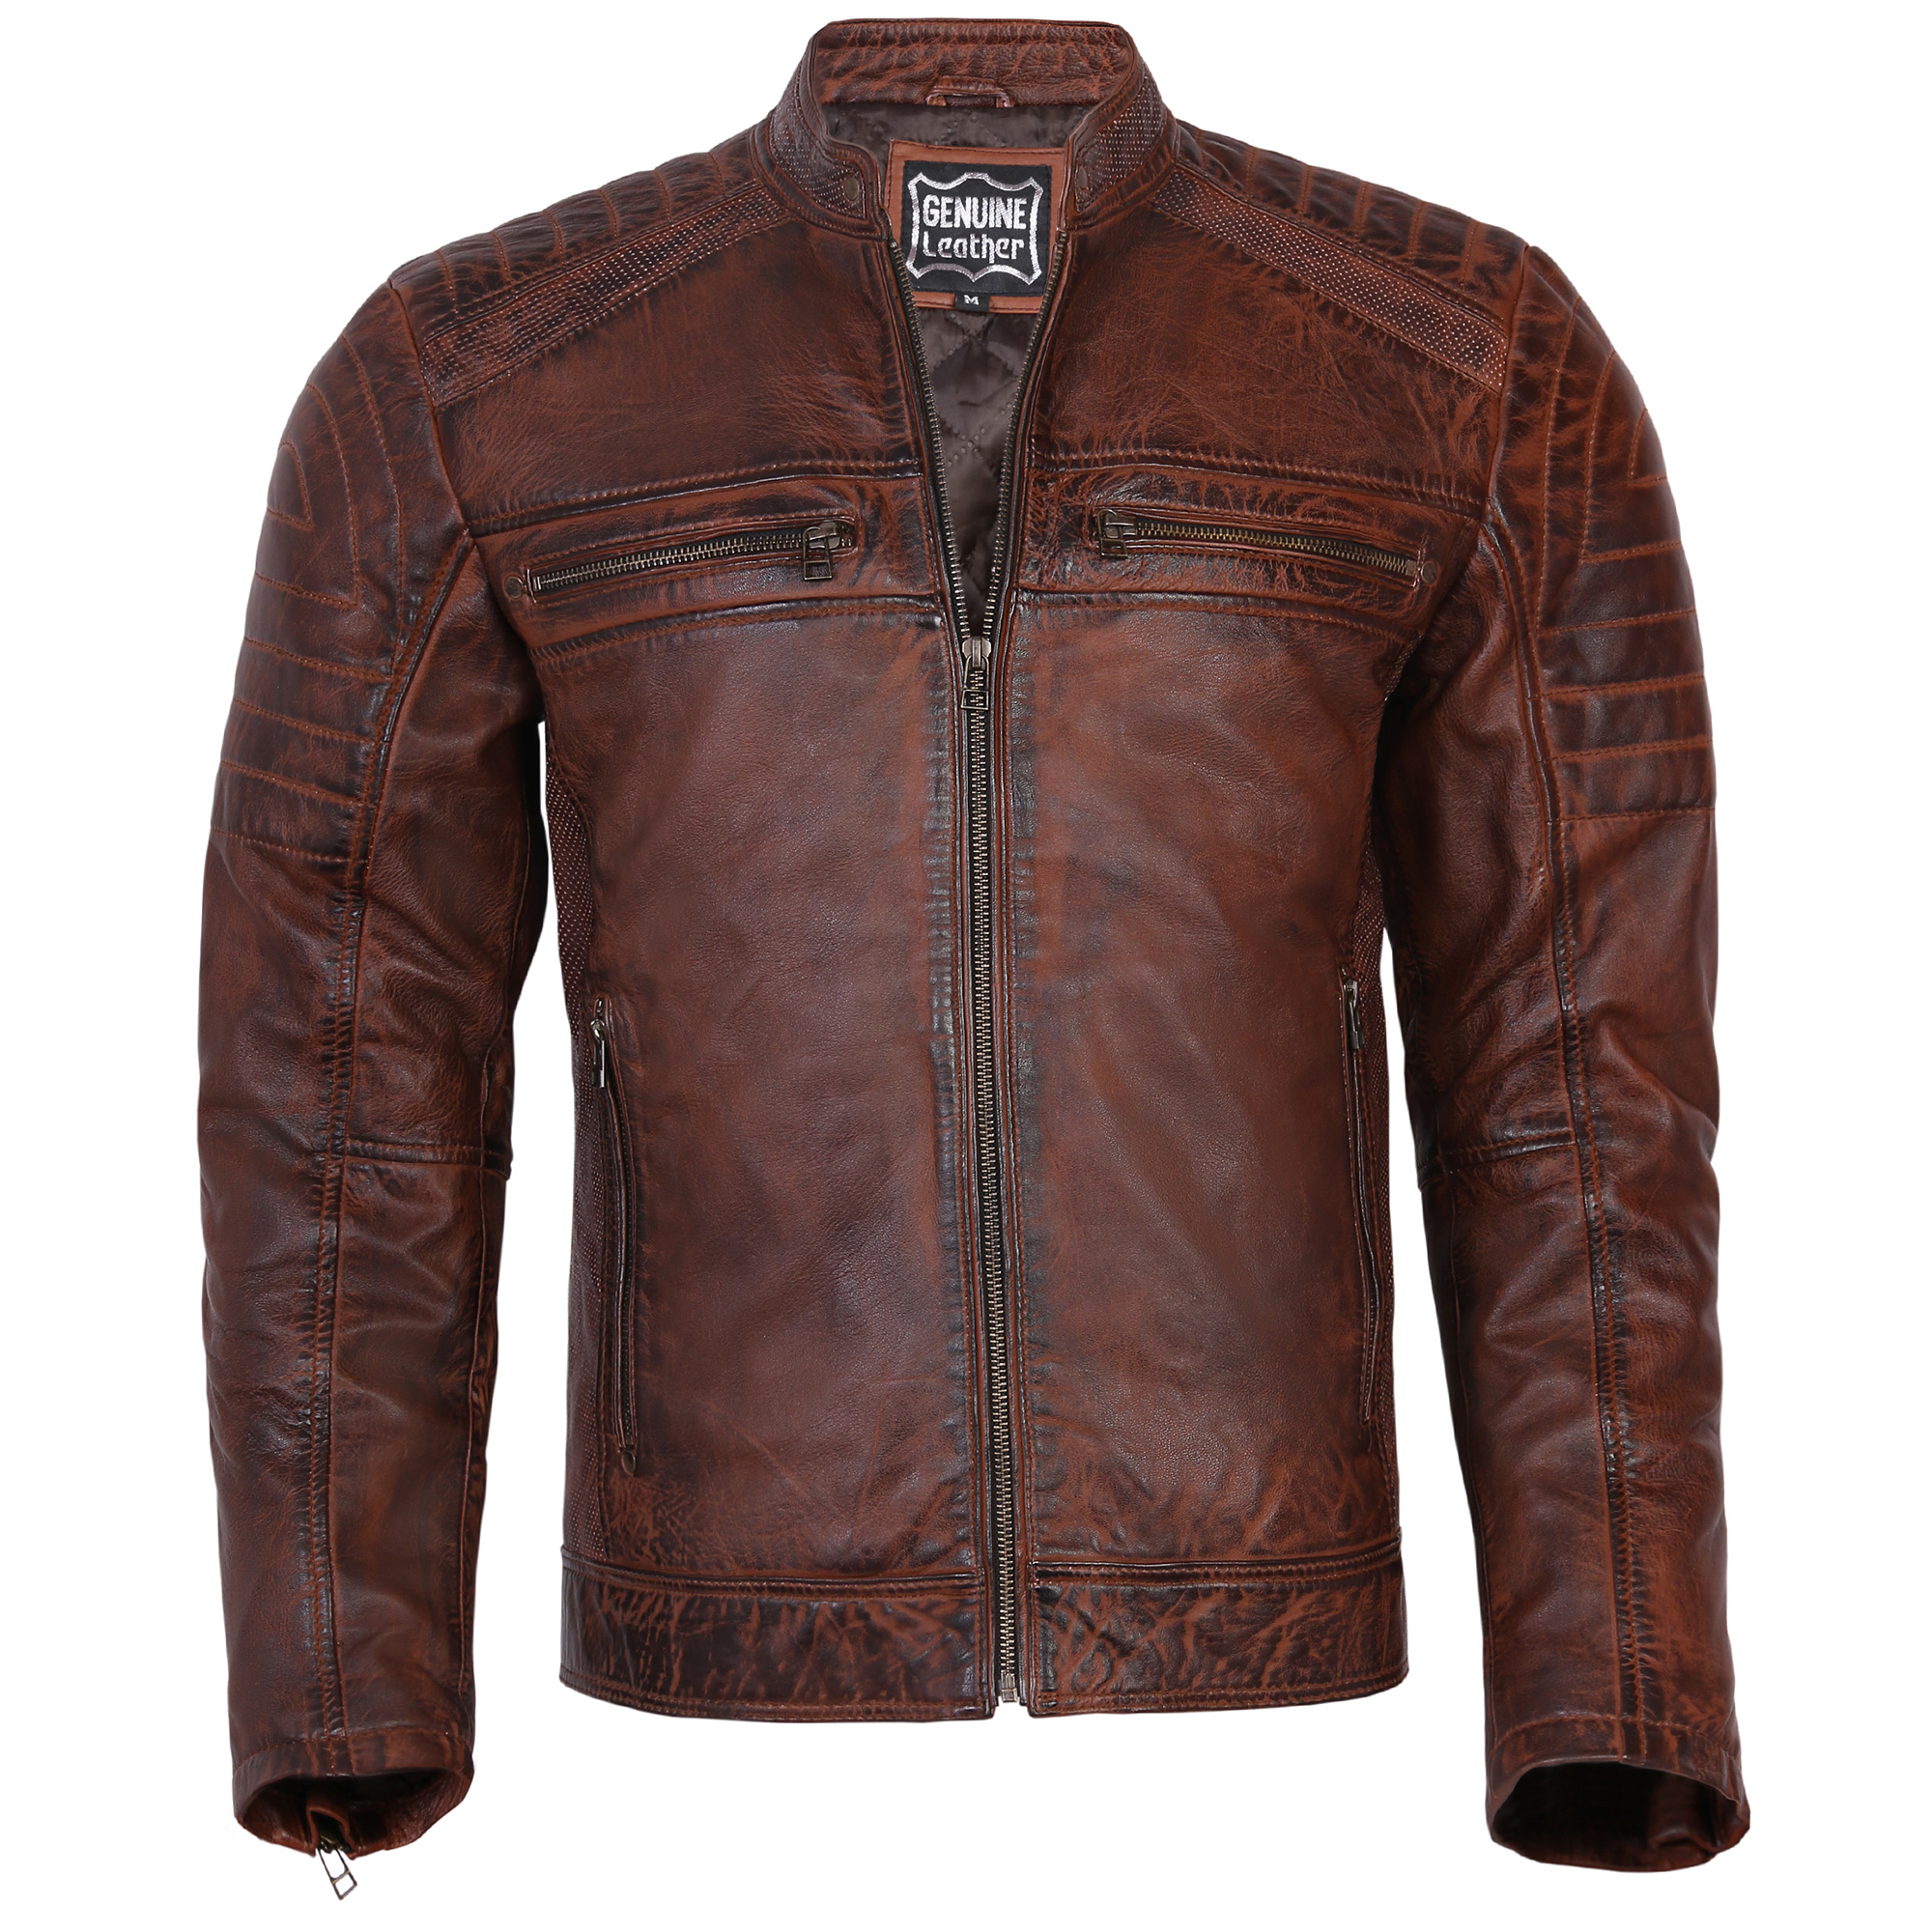 3XL for 50 inches Mens, Cafe Racer Vintage Cafe Racer Jacket Brown Riding Motorcycle Biker Leather 